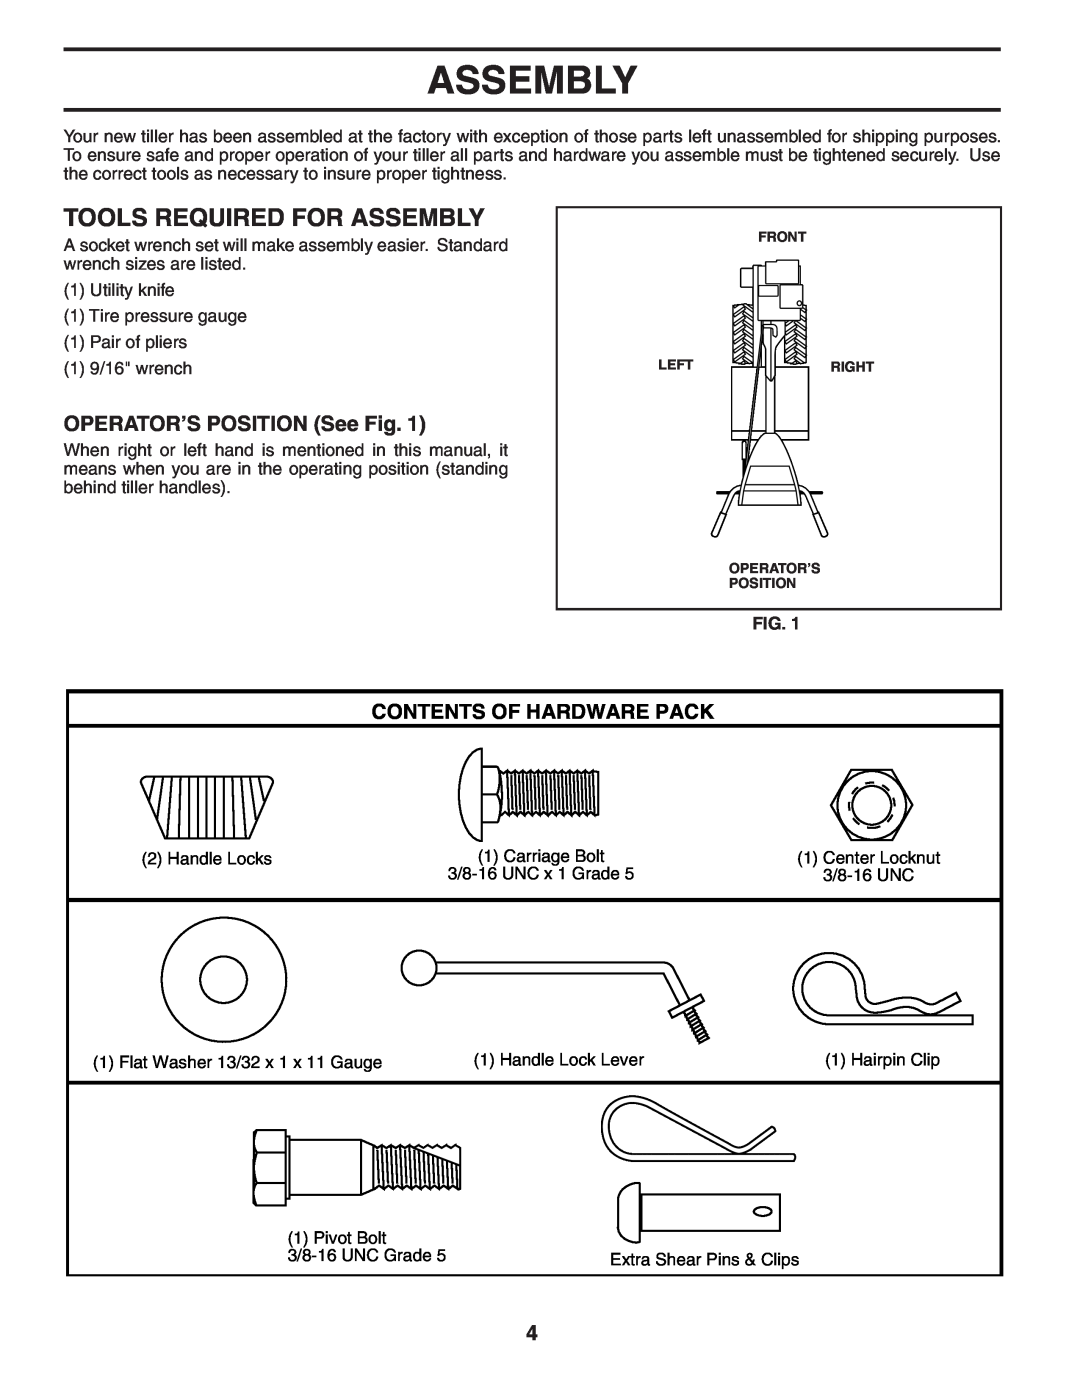 Poulan DRT65 manual Tools Required For Assembly, OPERATOR’S POSITION See Fig, Contents Of Hardware Pack 